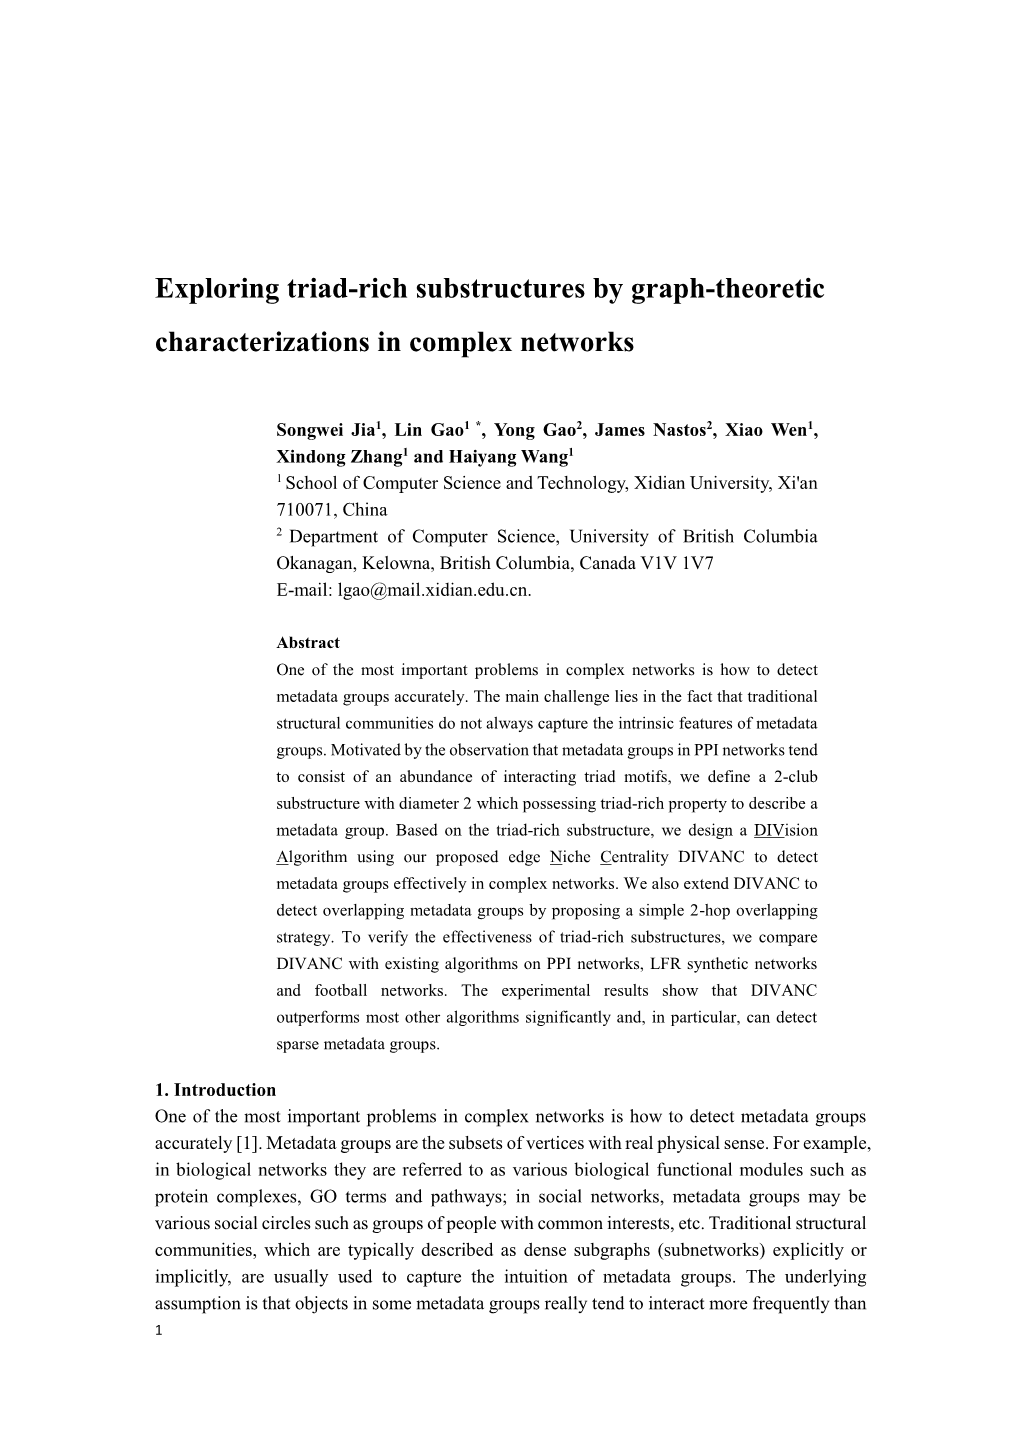 Exploring Triad-Rich Substructures by Graph-Theoretic Characterizations in Complex Networks